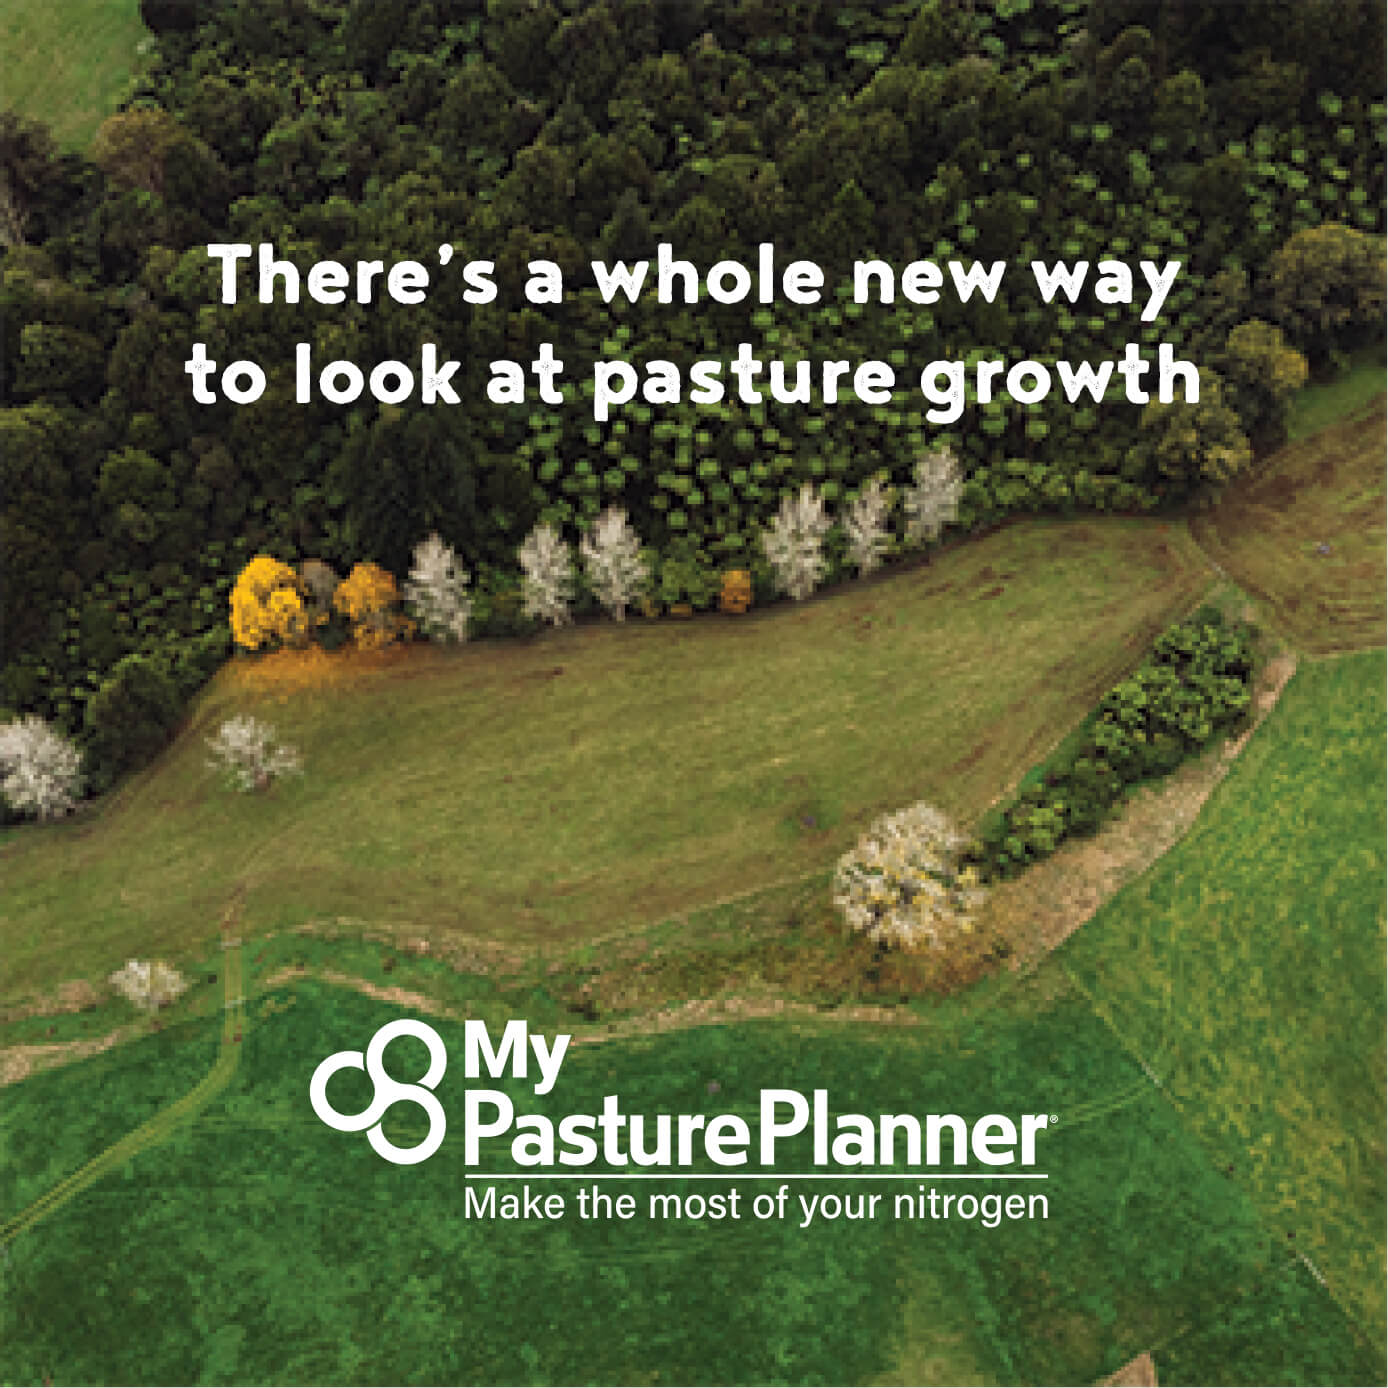 There's a whole new way to look at pasture growth